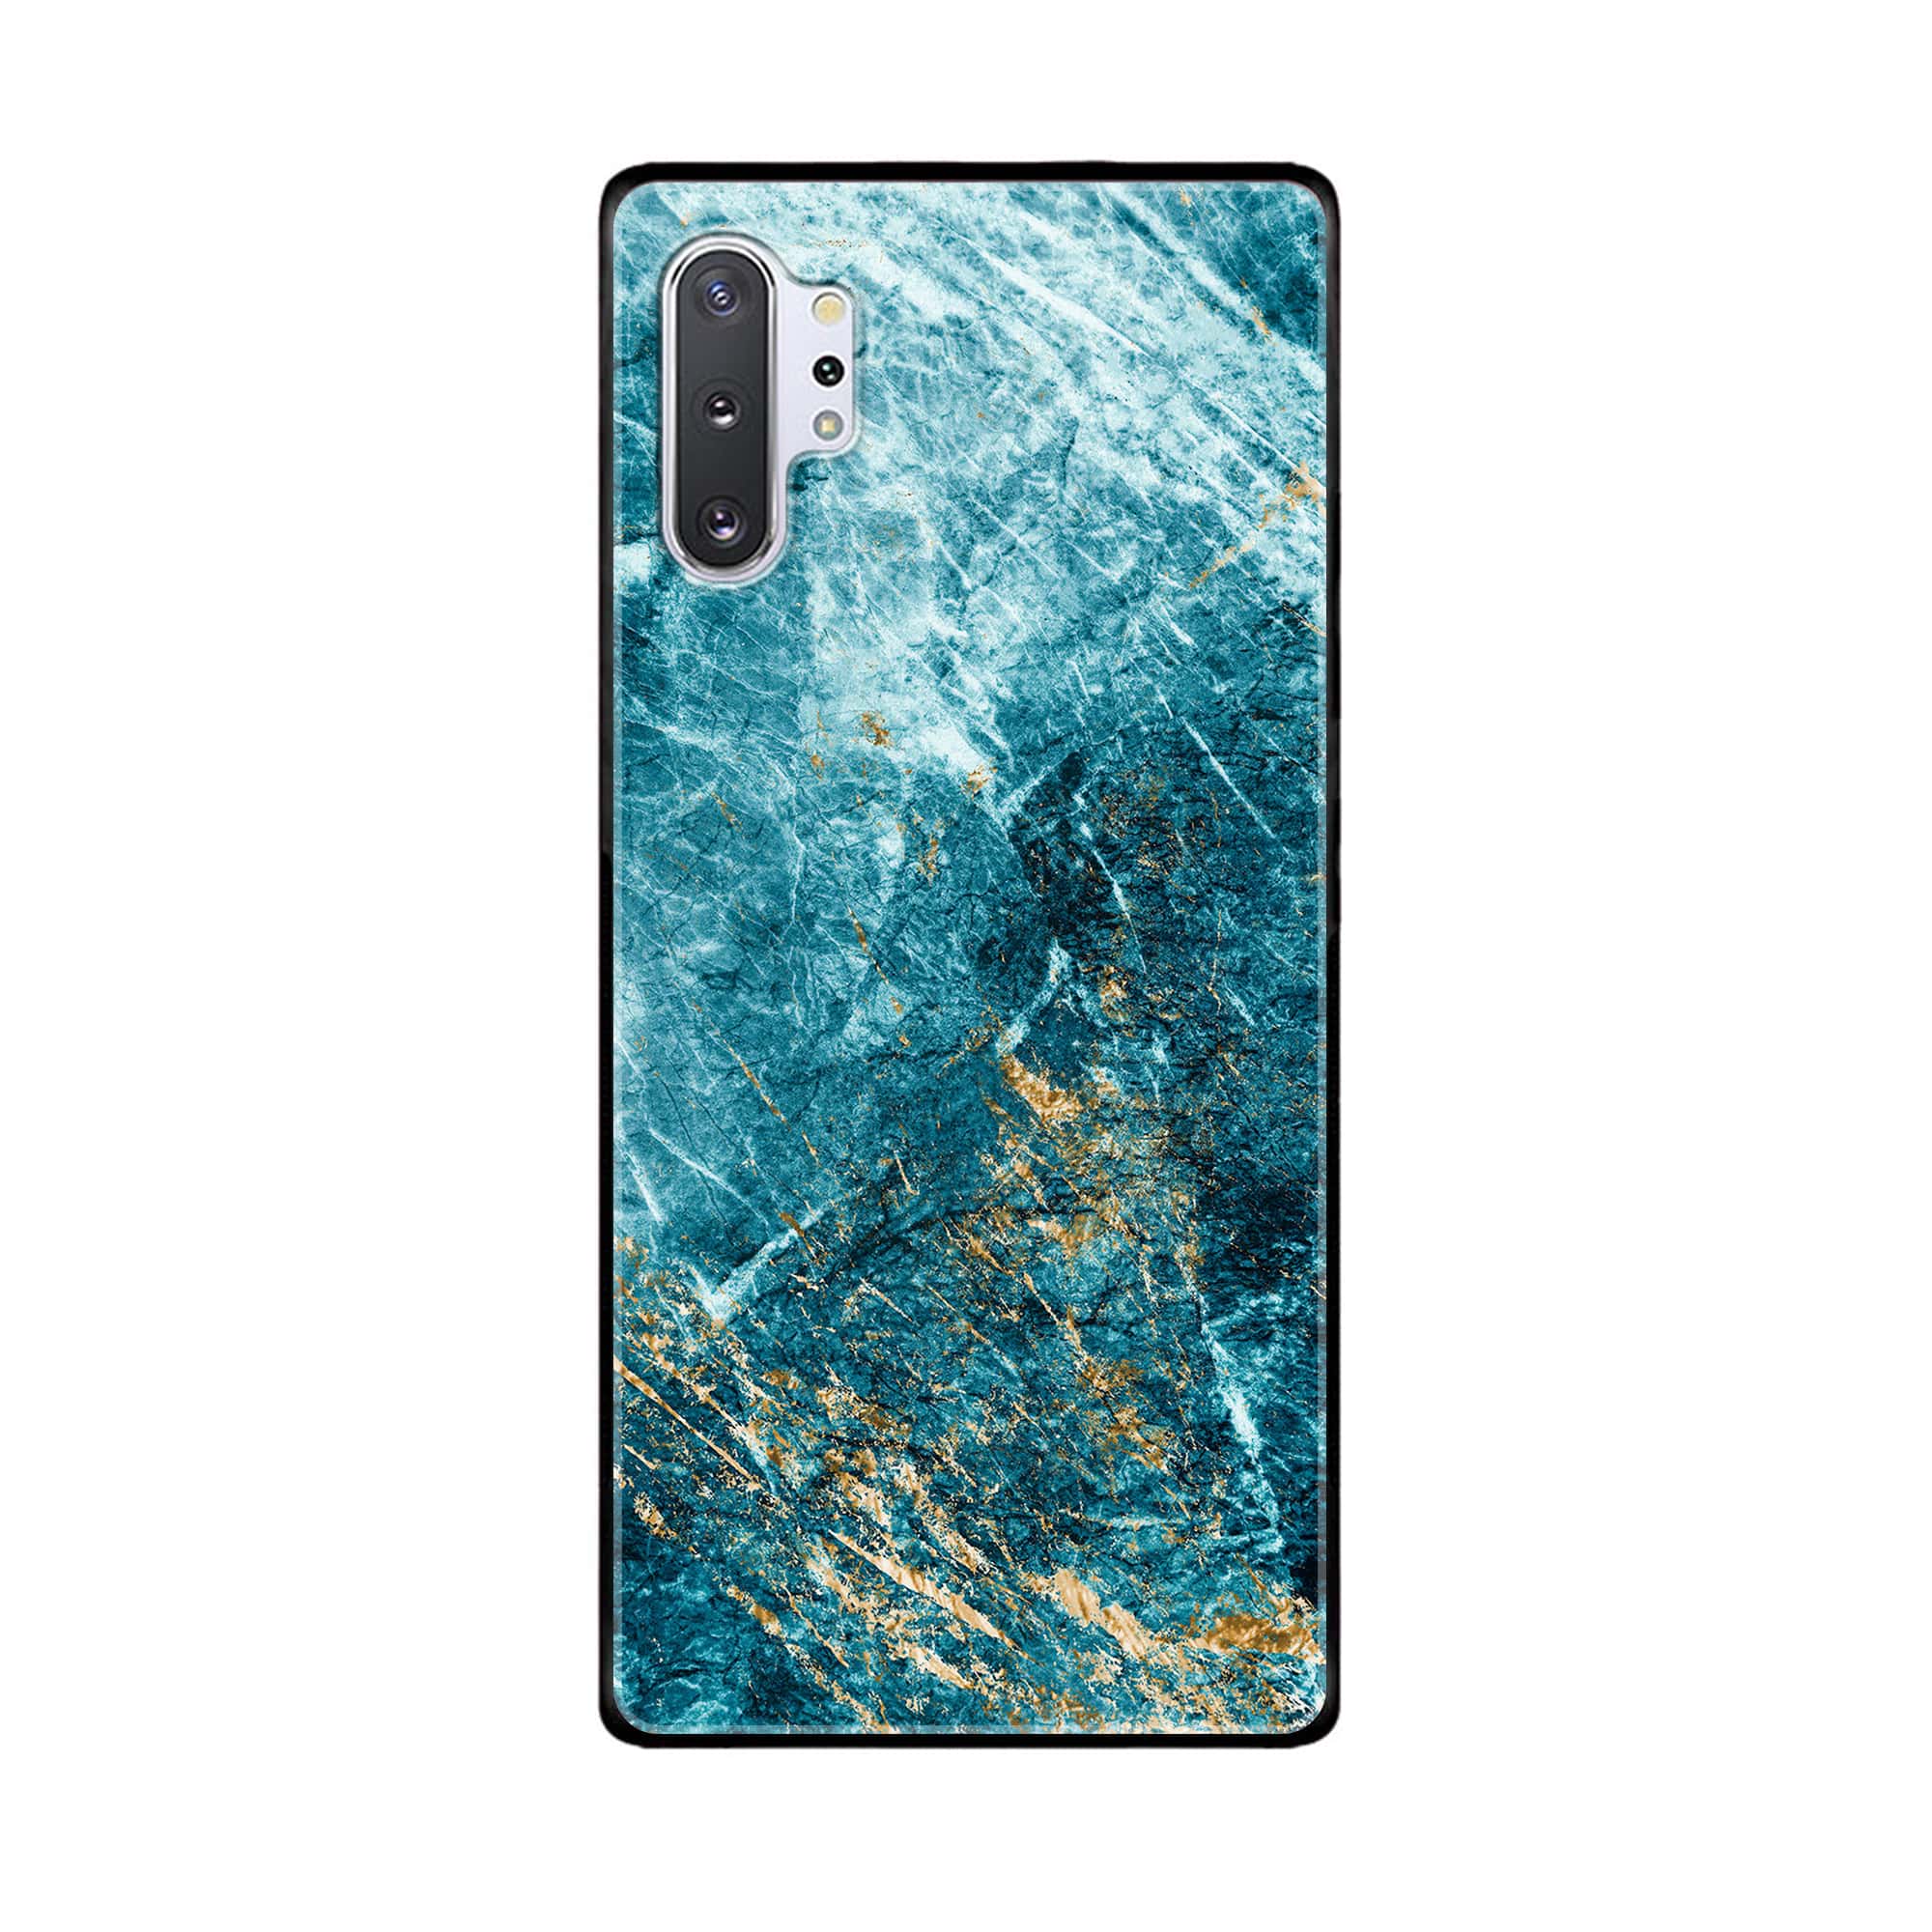 Galaxy Note 10 Pro/Plus - Blue Marble Series V 2.0 - Premium Printed Glass soft Bumper shock Proof Case